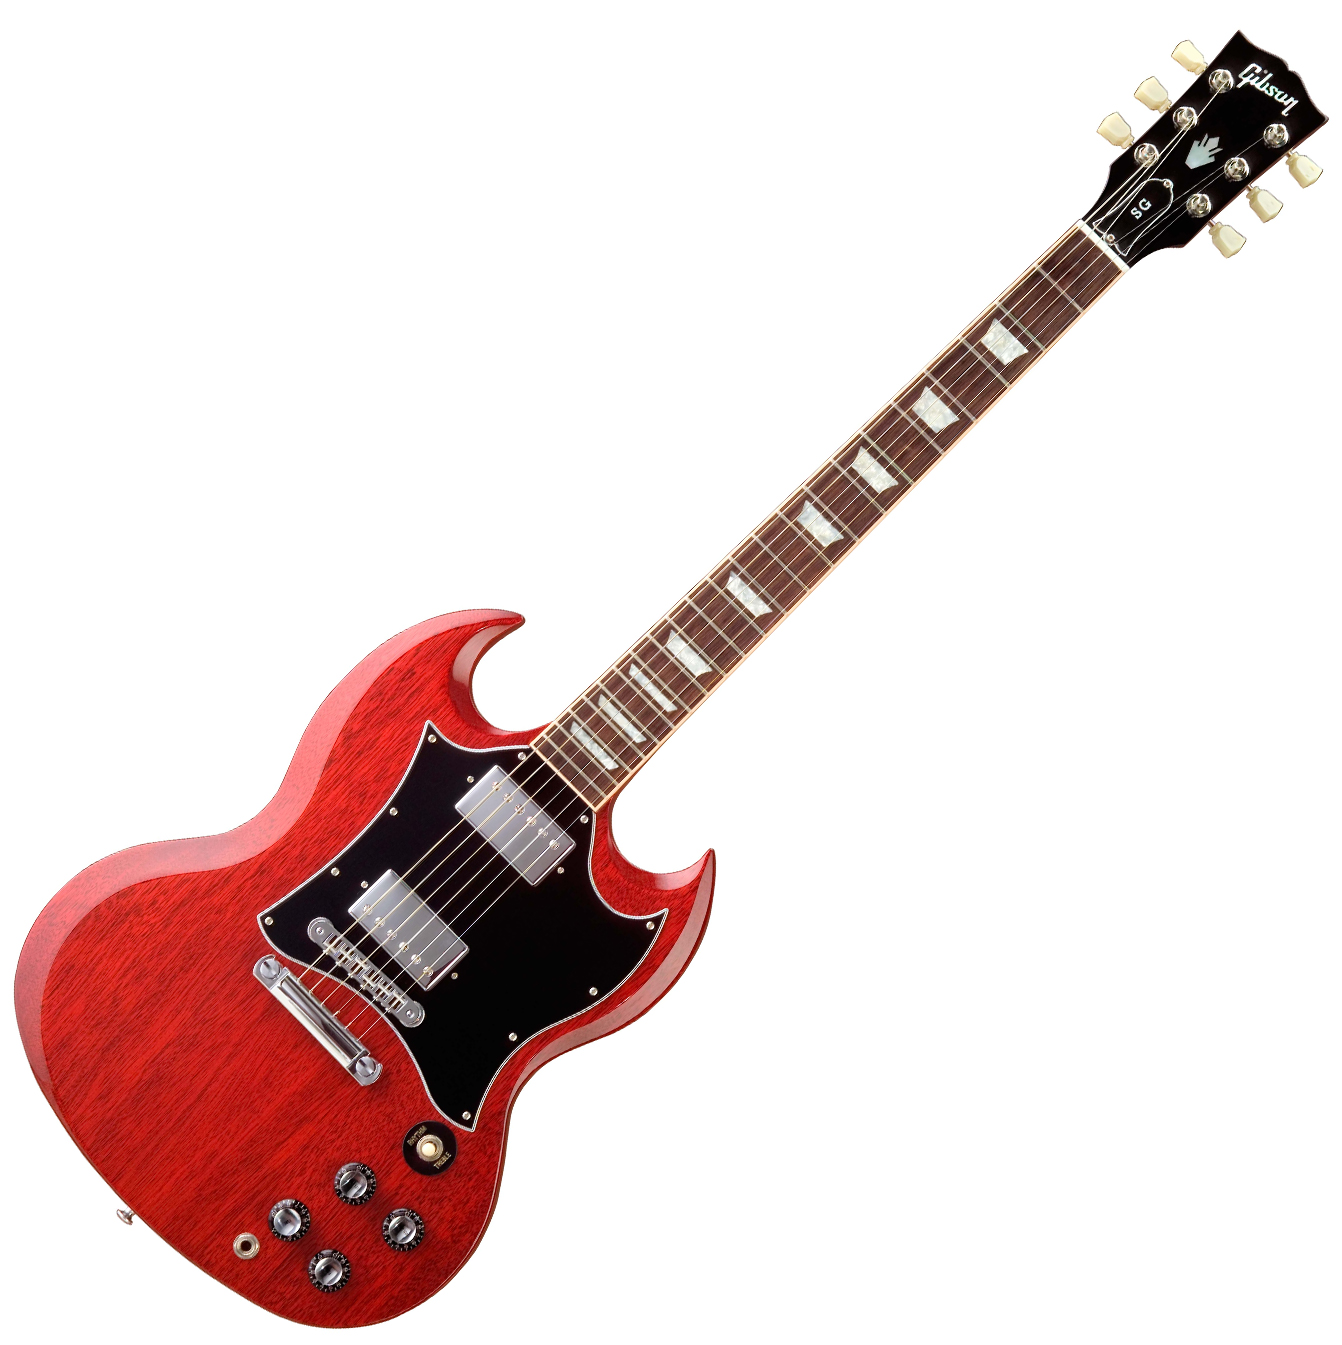 Gibson Sg Gt Electric Guitar Pictures to pin on Pinterest